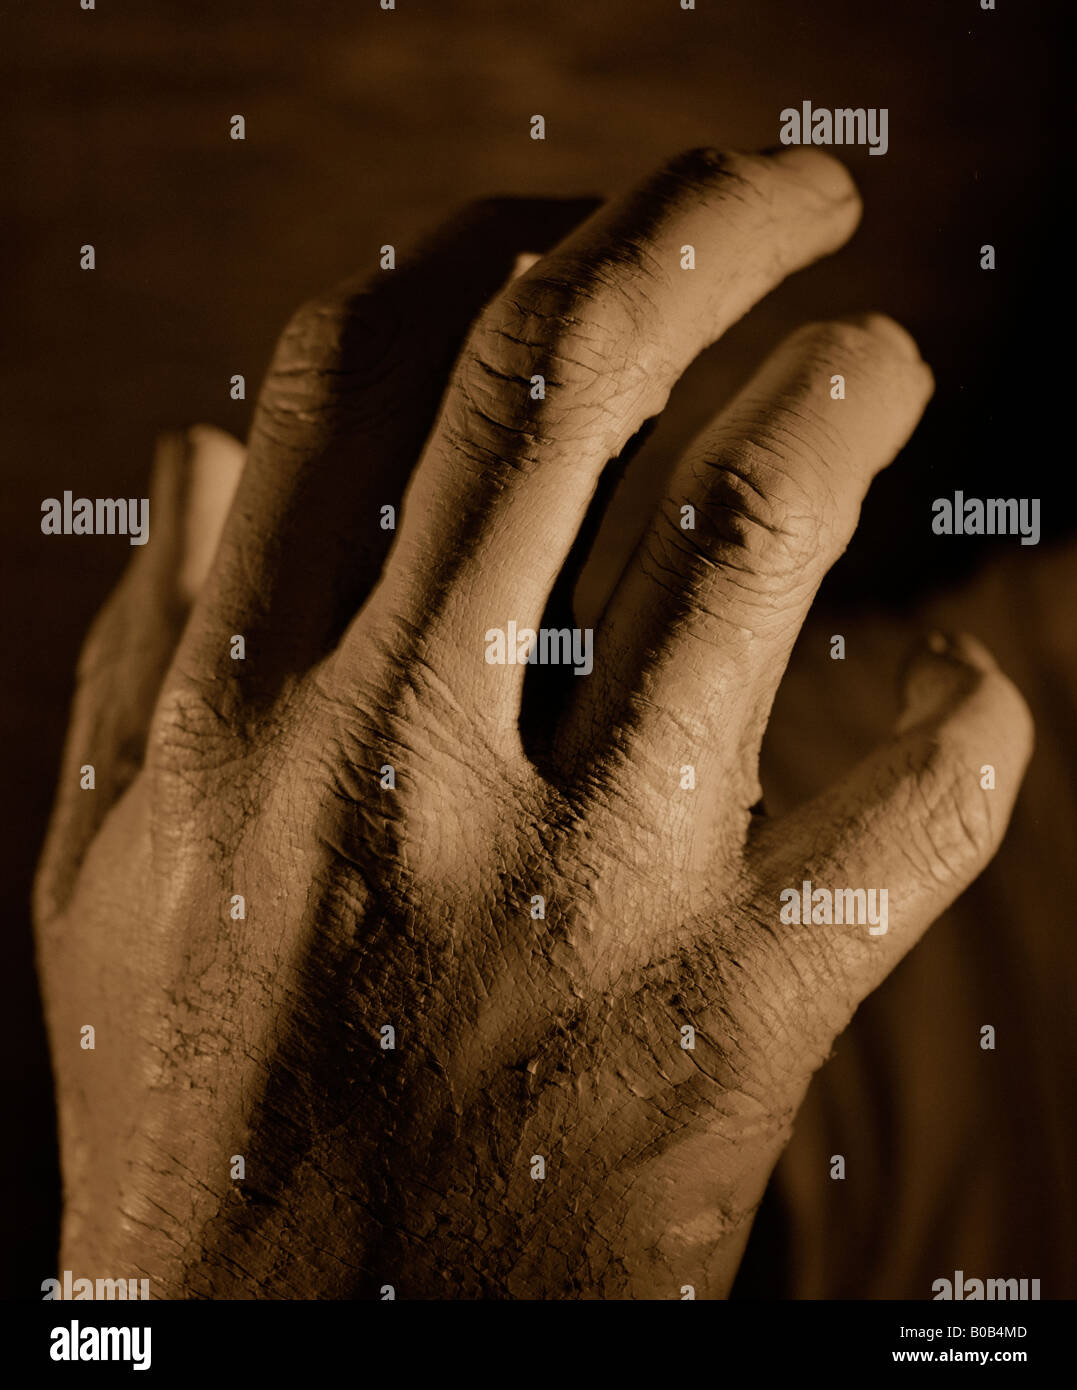 hands with cracked covering on skin Stock Photo